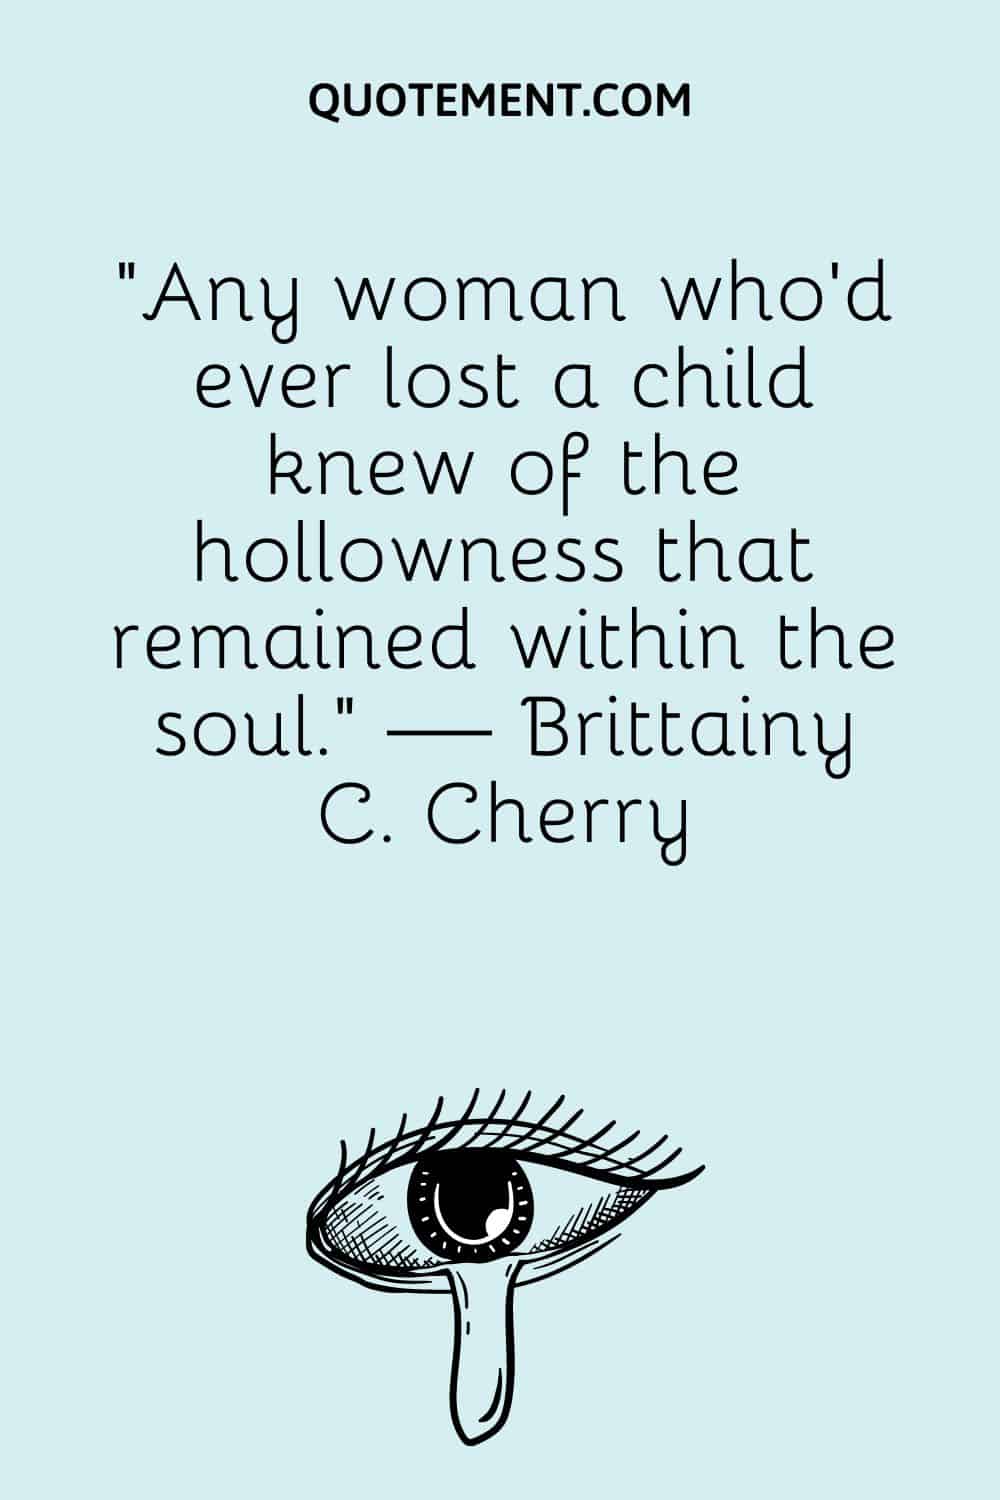 “Any woman who’d ever lost a child knew of the hollowness that remained within the soul.” — Brittainy C. Cherry